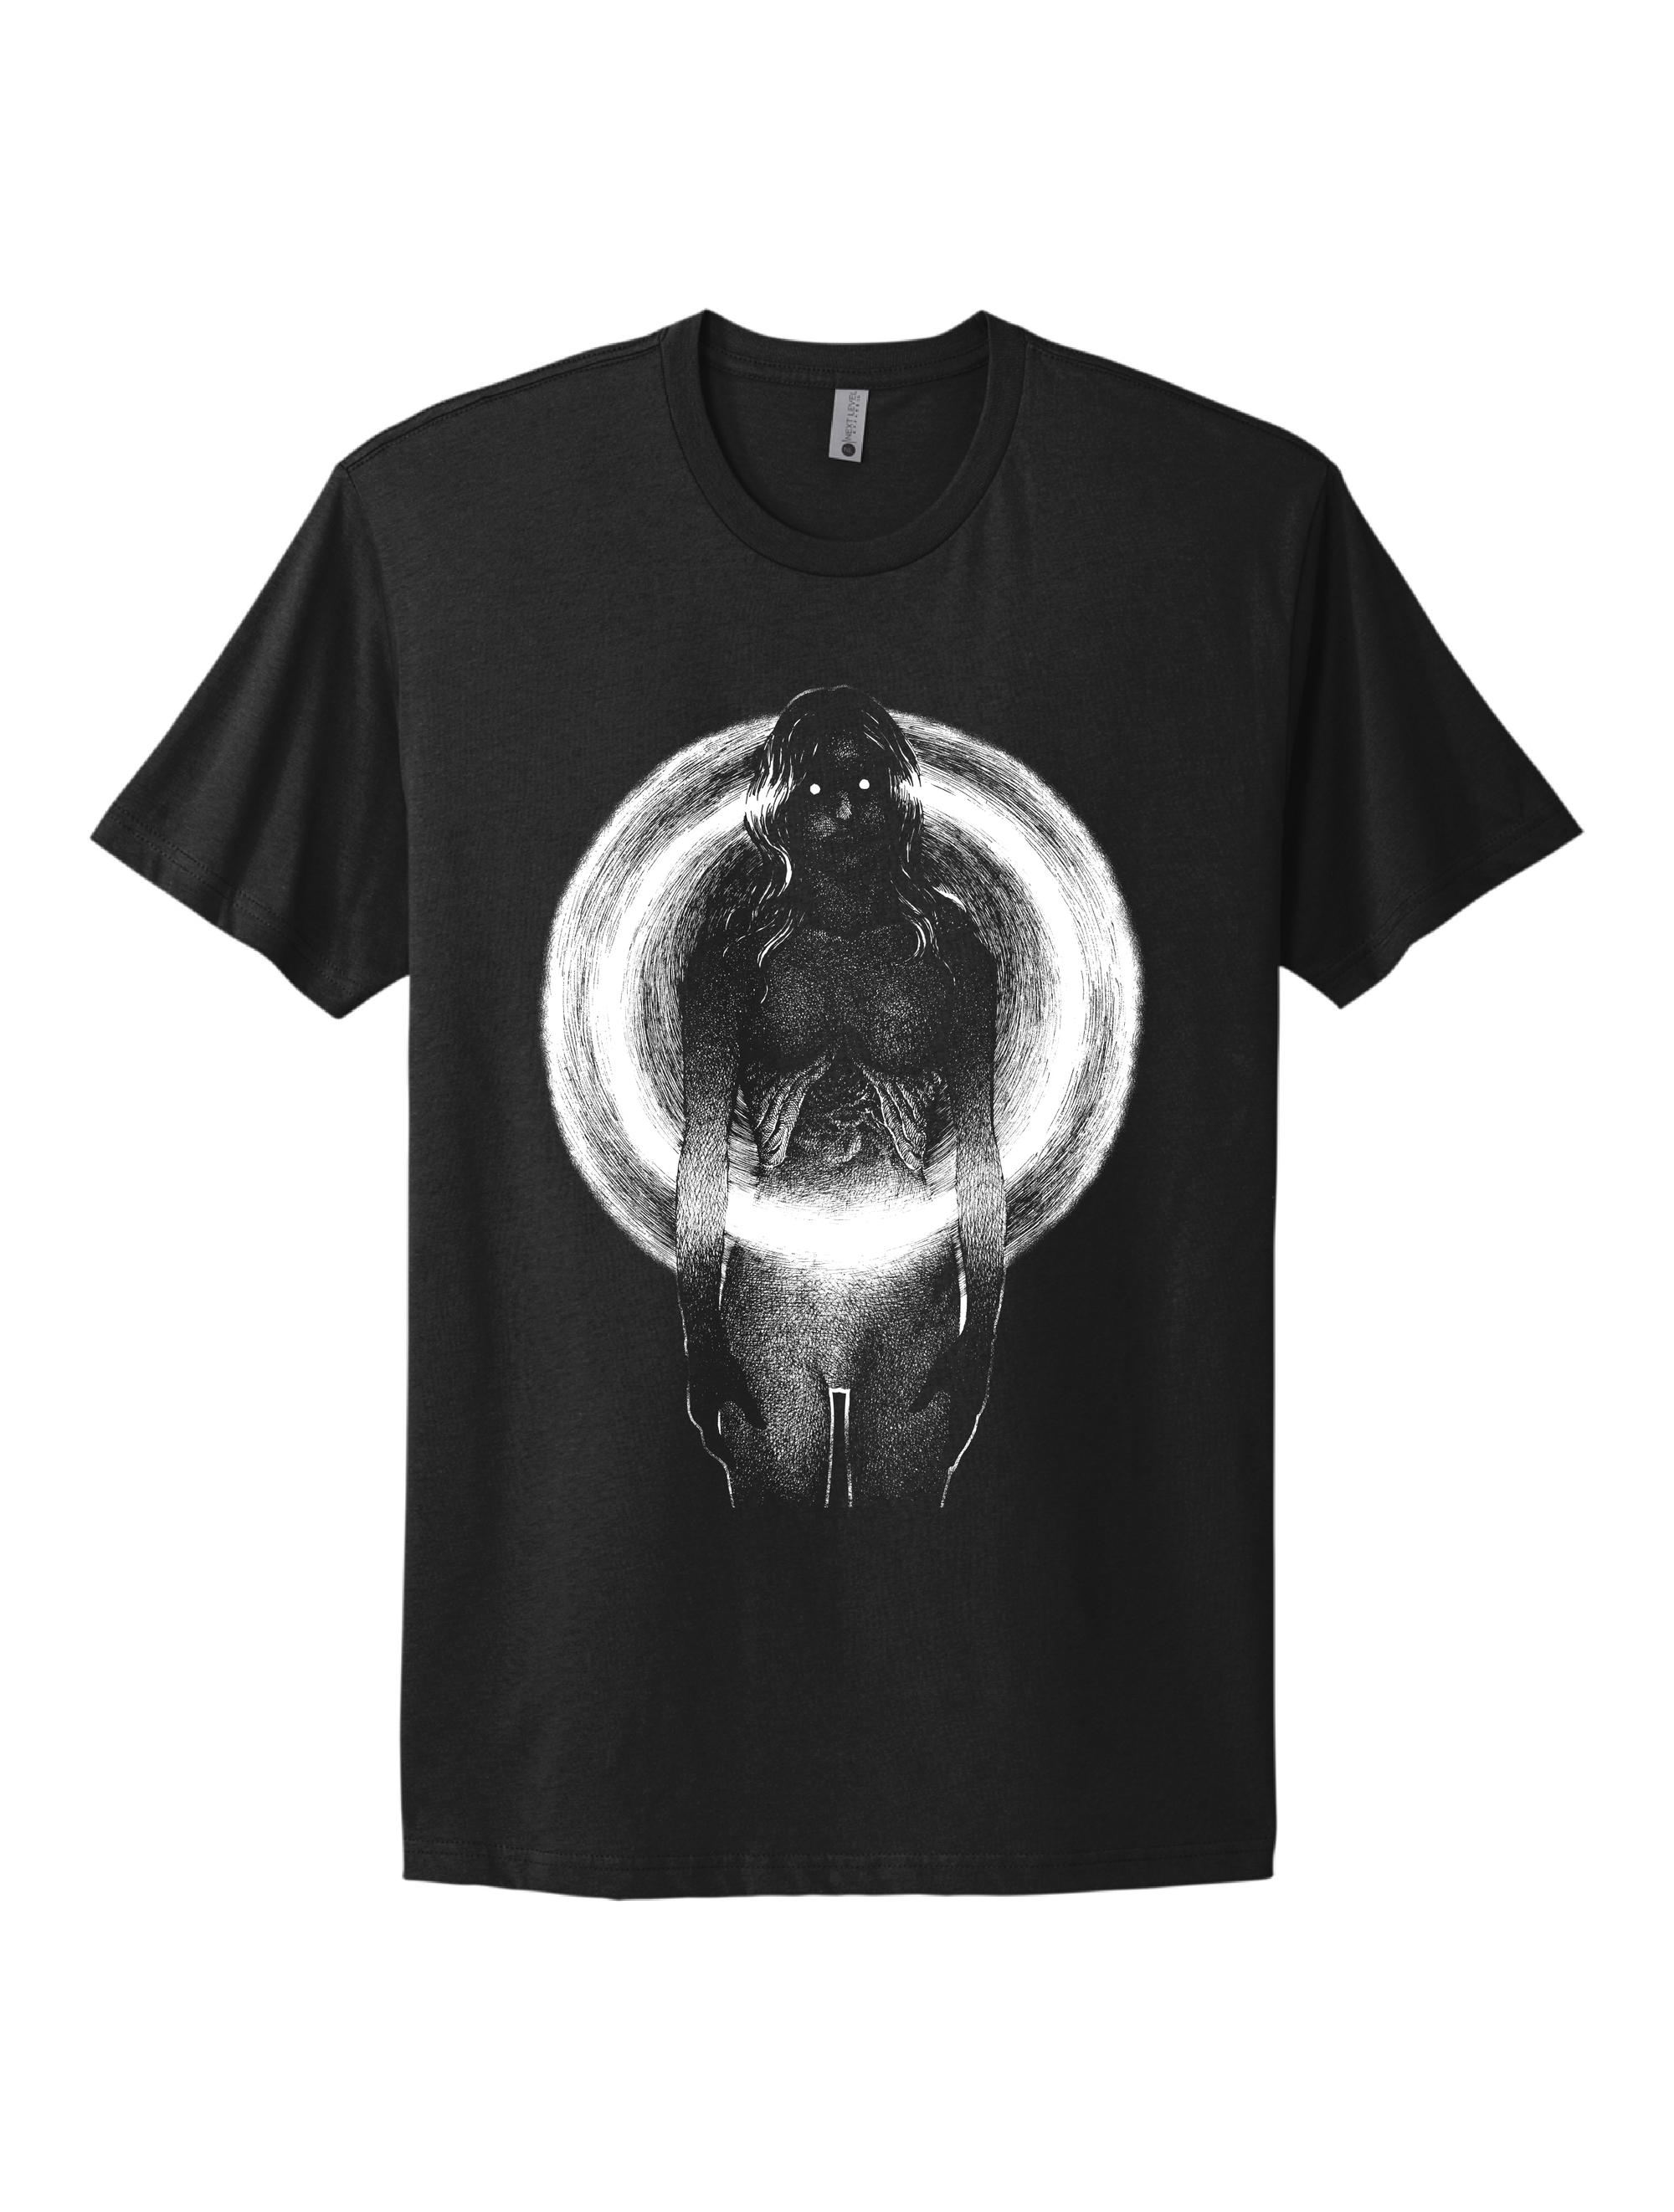 Black & White image by Brandon Stewart of a creepy woman with her chest cavity exposed on a black short sleeve t-shirt